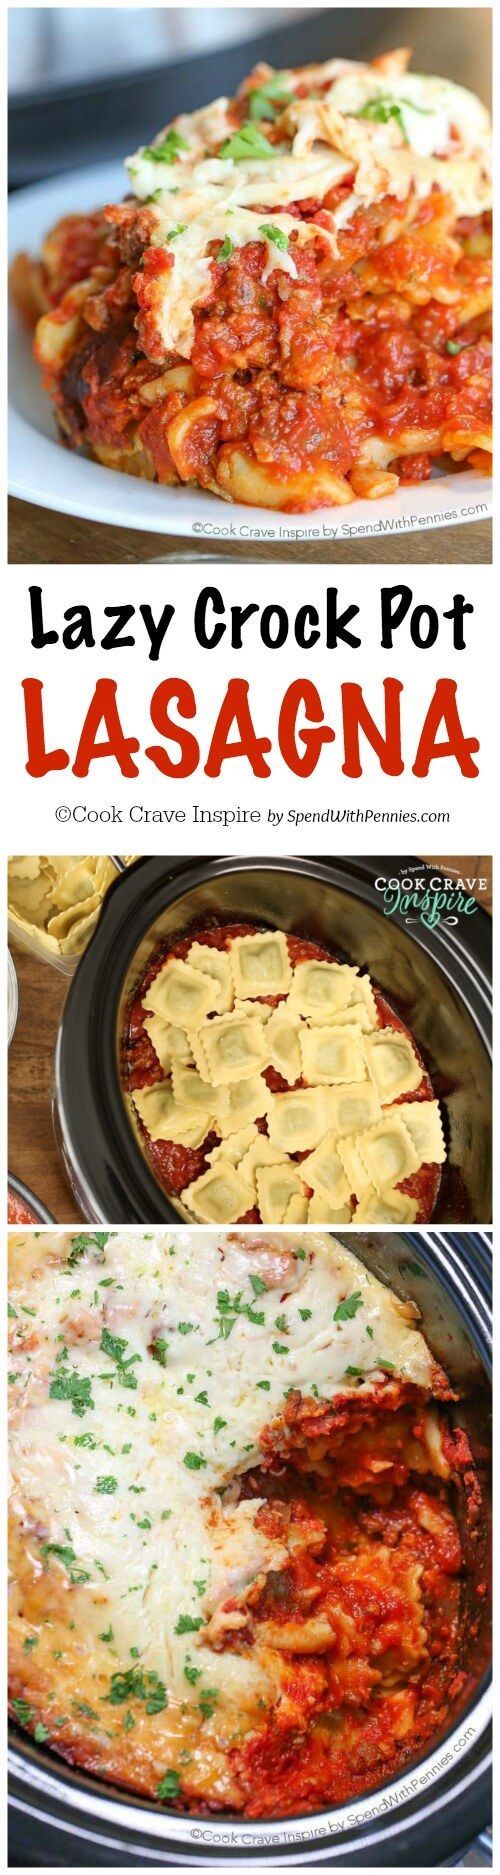 Lazy Crock Pot Lasagna is a family favorite and so quick and easy to make! A delicious meat sauce is layered with cheese and